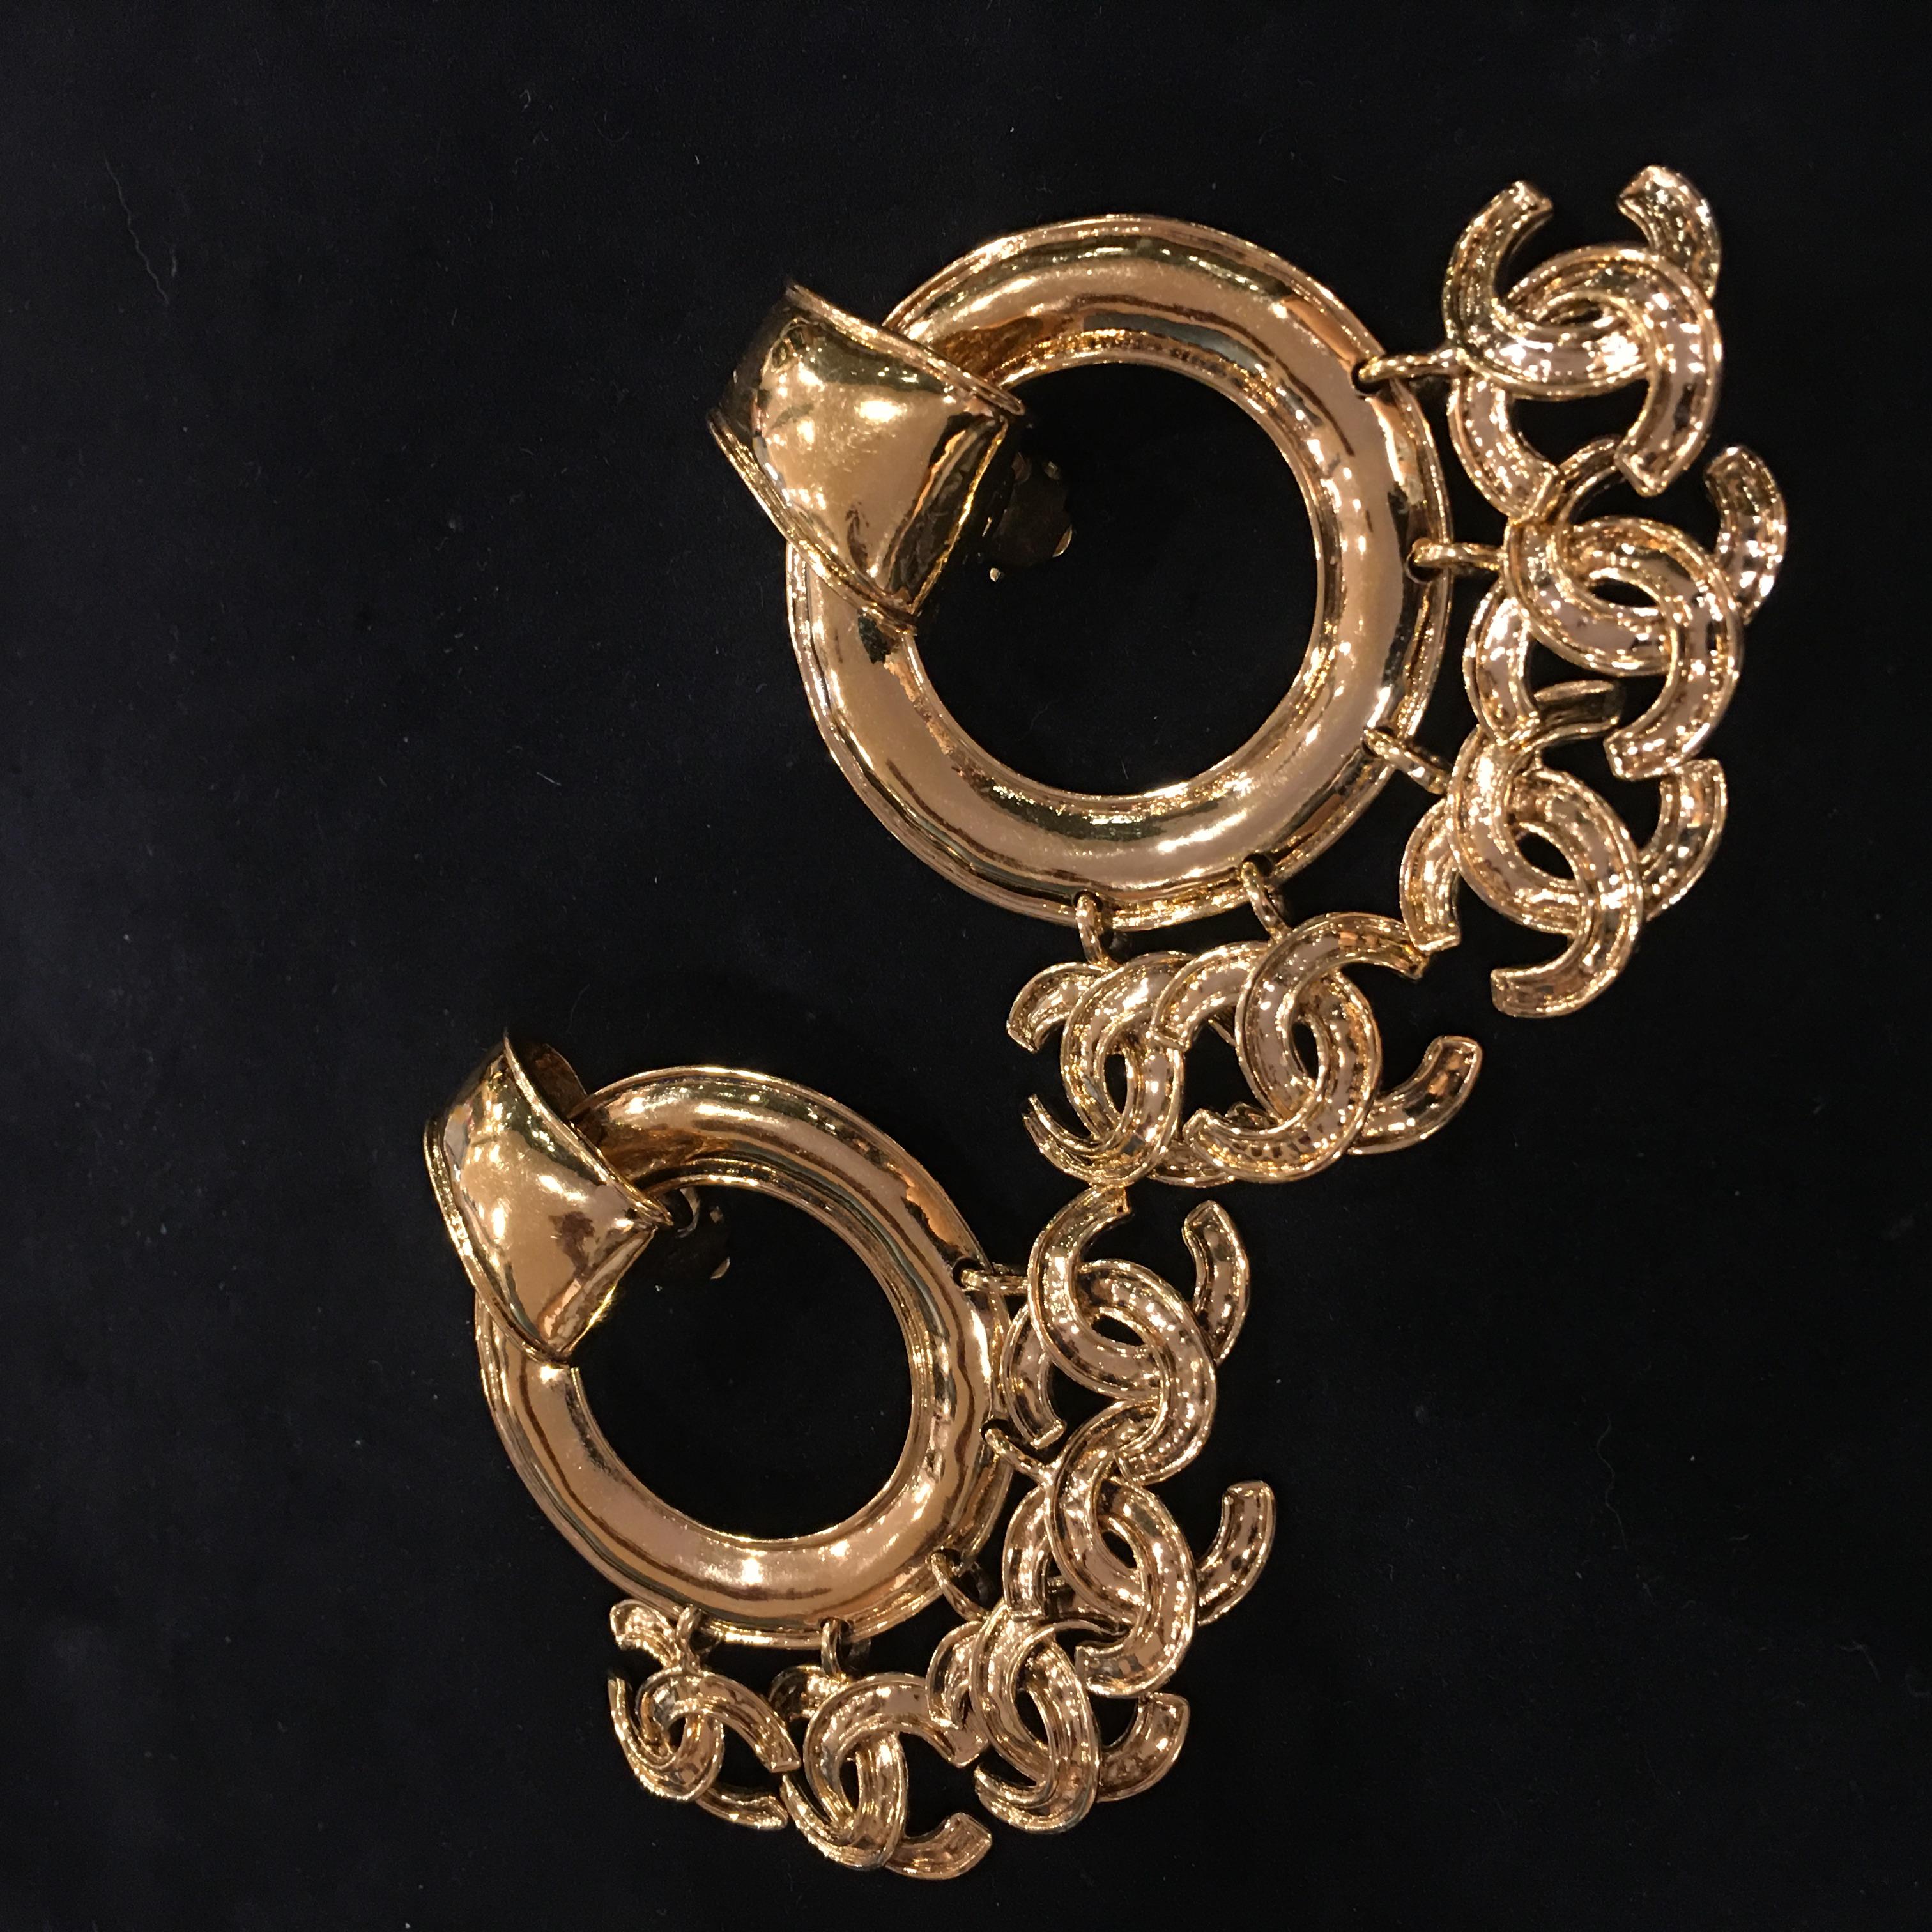 Brand: Chanel
Reference: JW328
Length of Earring: 7.8cm x 8.0cm
Material: Gilt Metal
Year: 1994
Made in France

Please Note: the jewelries are guarantee 100% authentic pre-owned therefore might have signs of tarnish or oxidation , please view detail